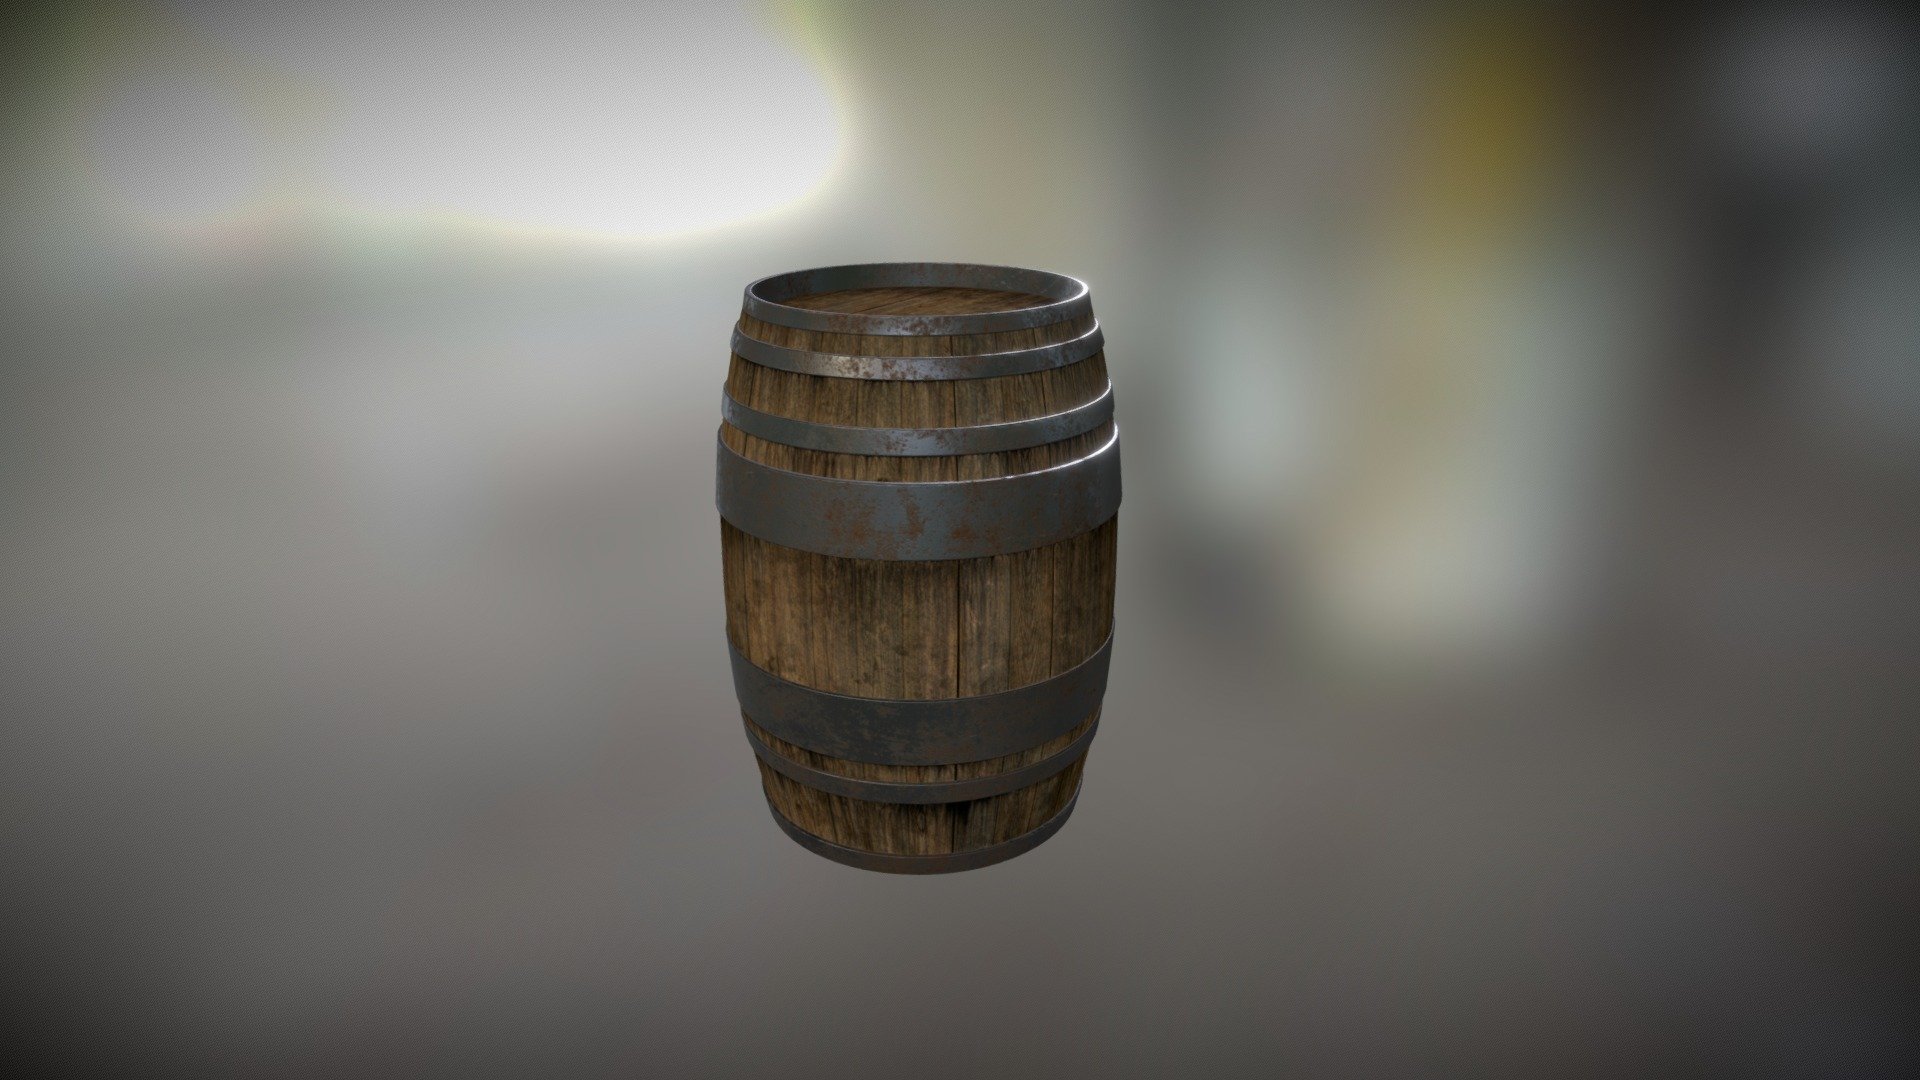 This is a barrel render i did for myself as a personnal work in my spare time, this model has 4096 triangles. the texture size is: 2048.
I did all the textures work with Substance Painter 3d model